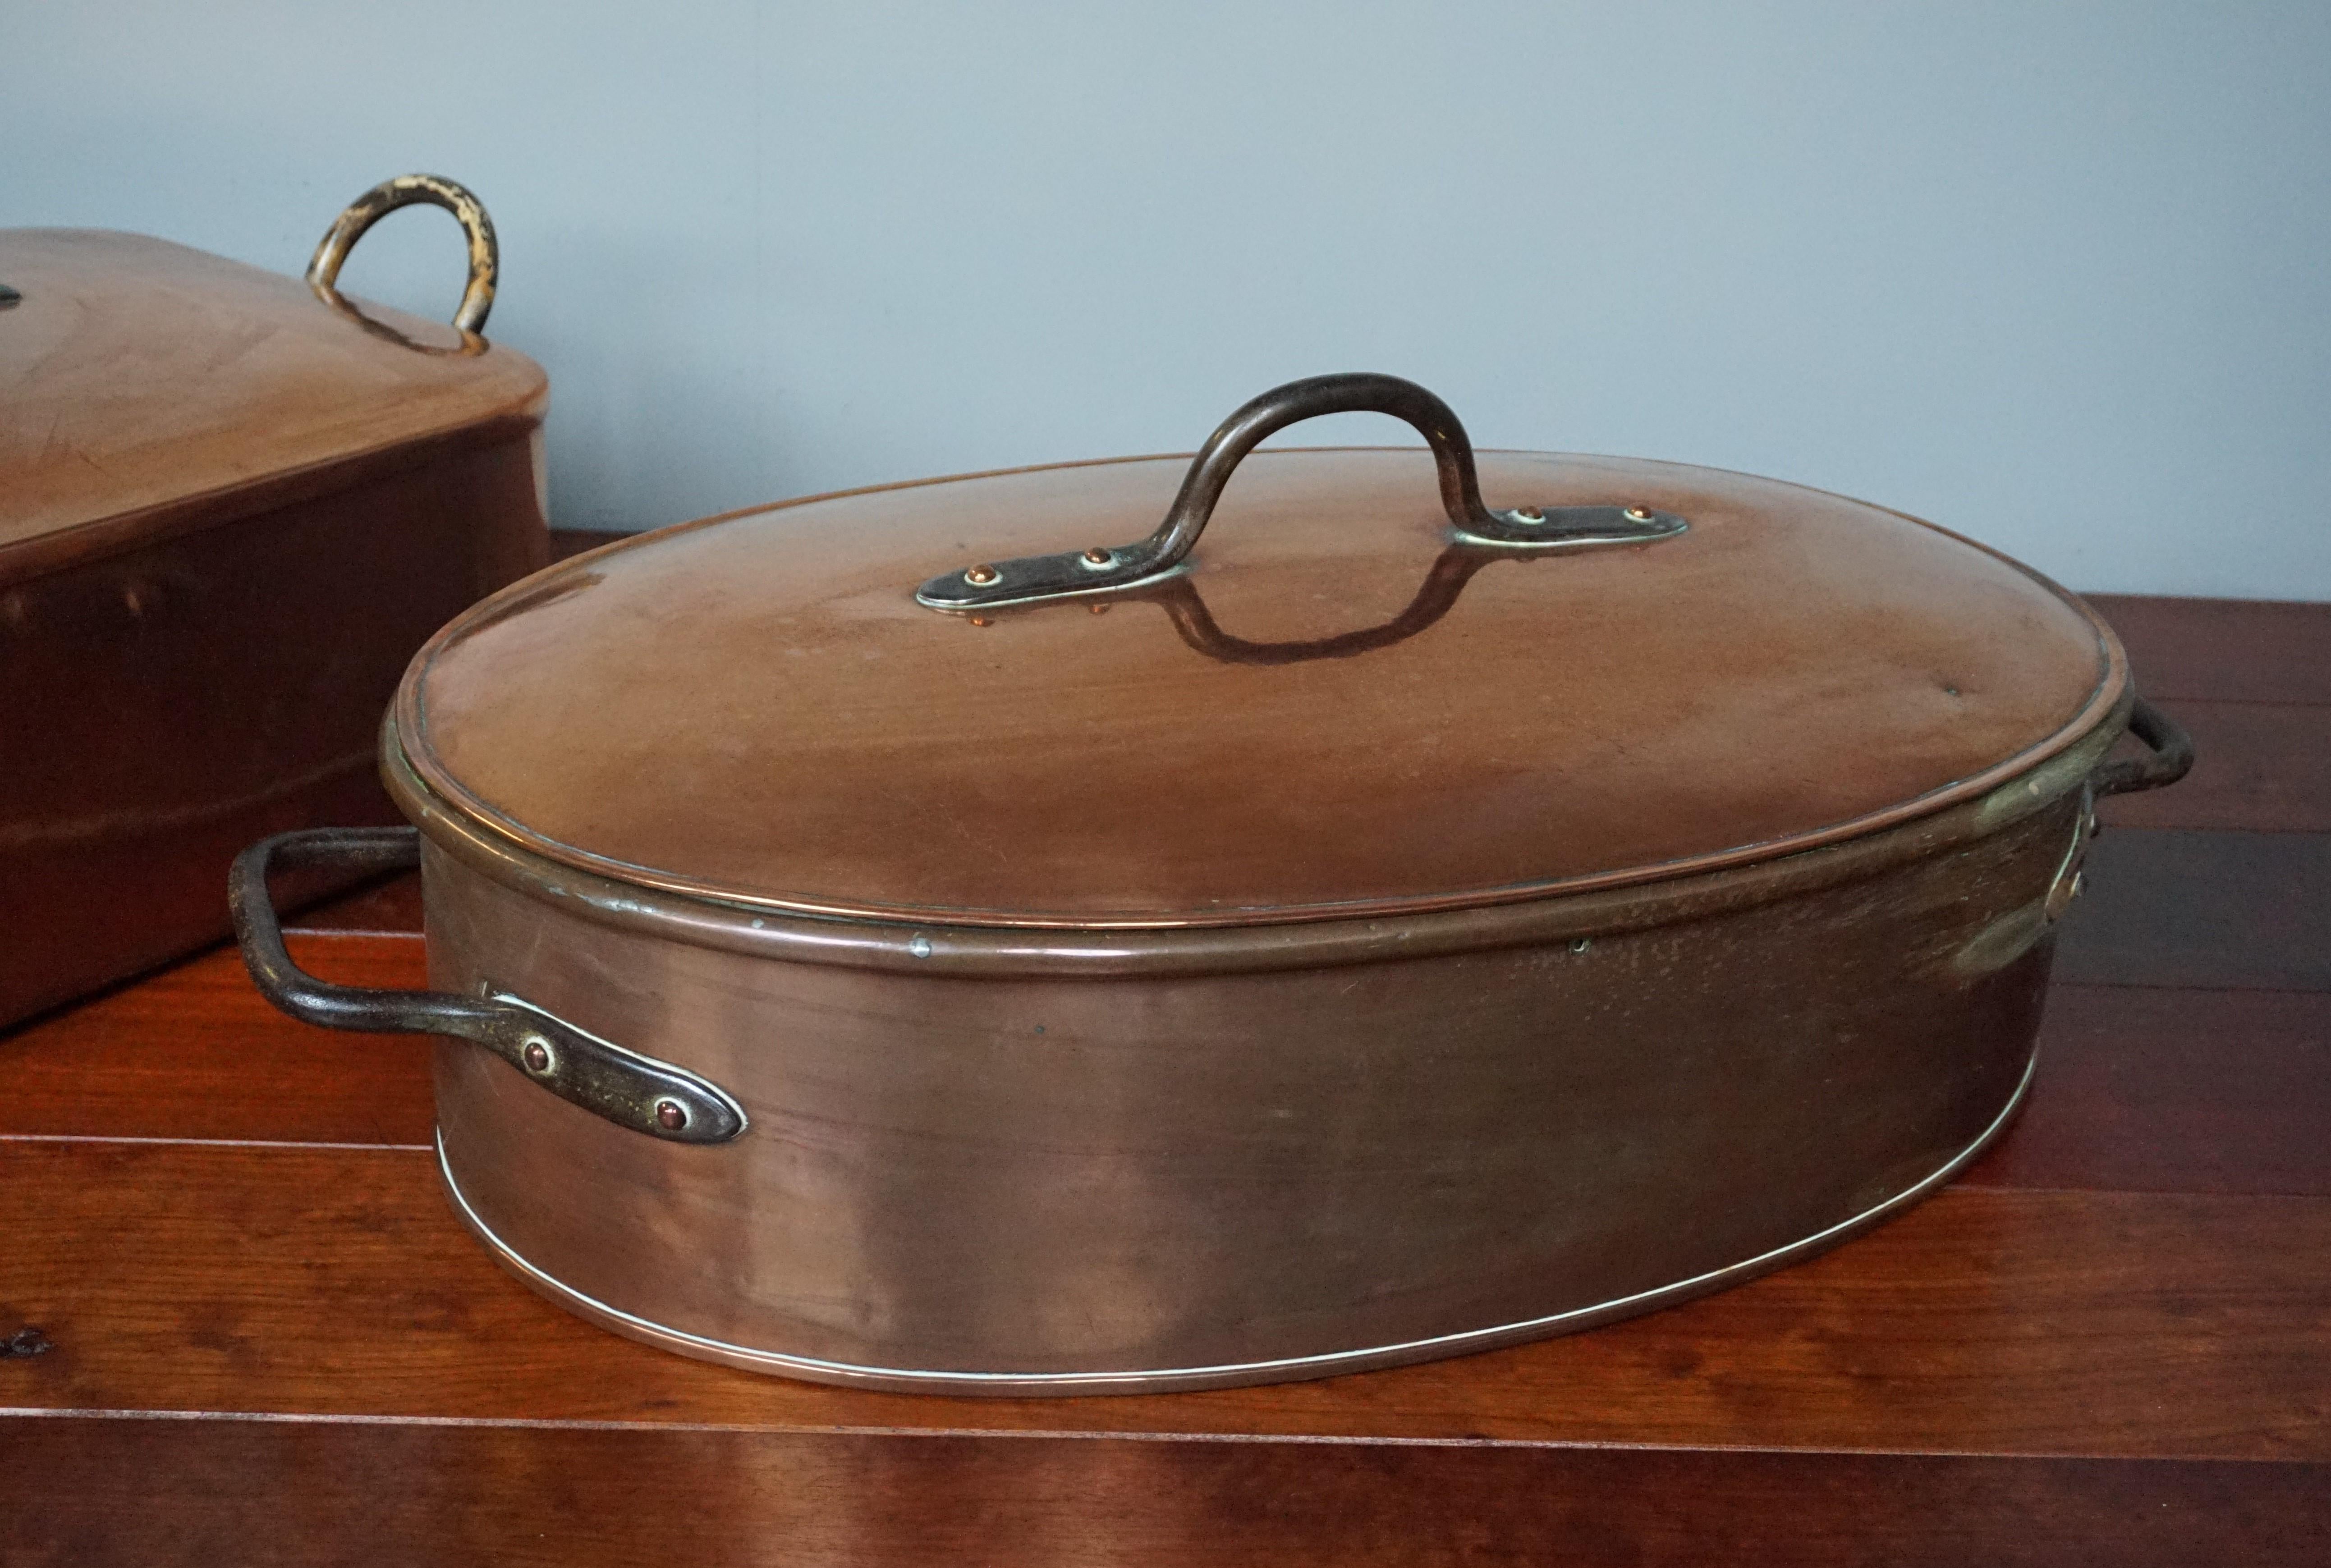 Stunning & Largest Ever Pair of Antique Copper Pans for Wild Roast in Late 1700s For Sale 8